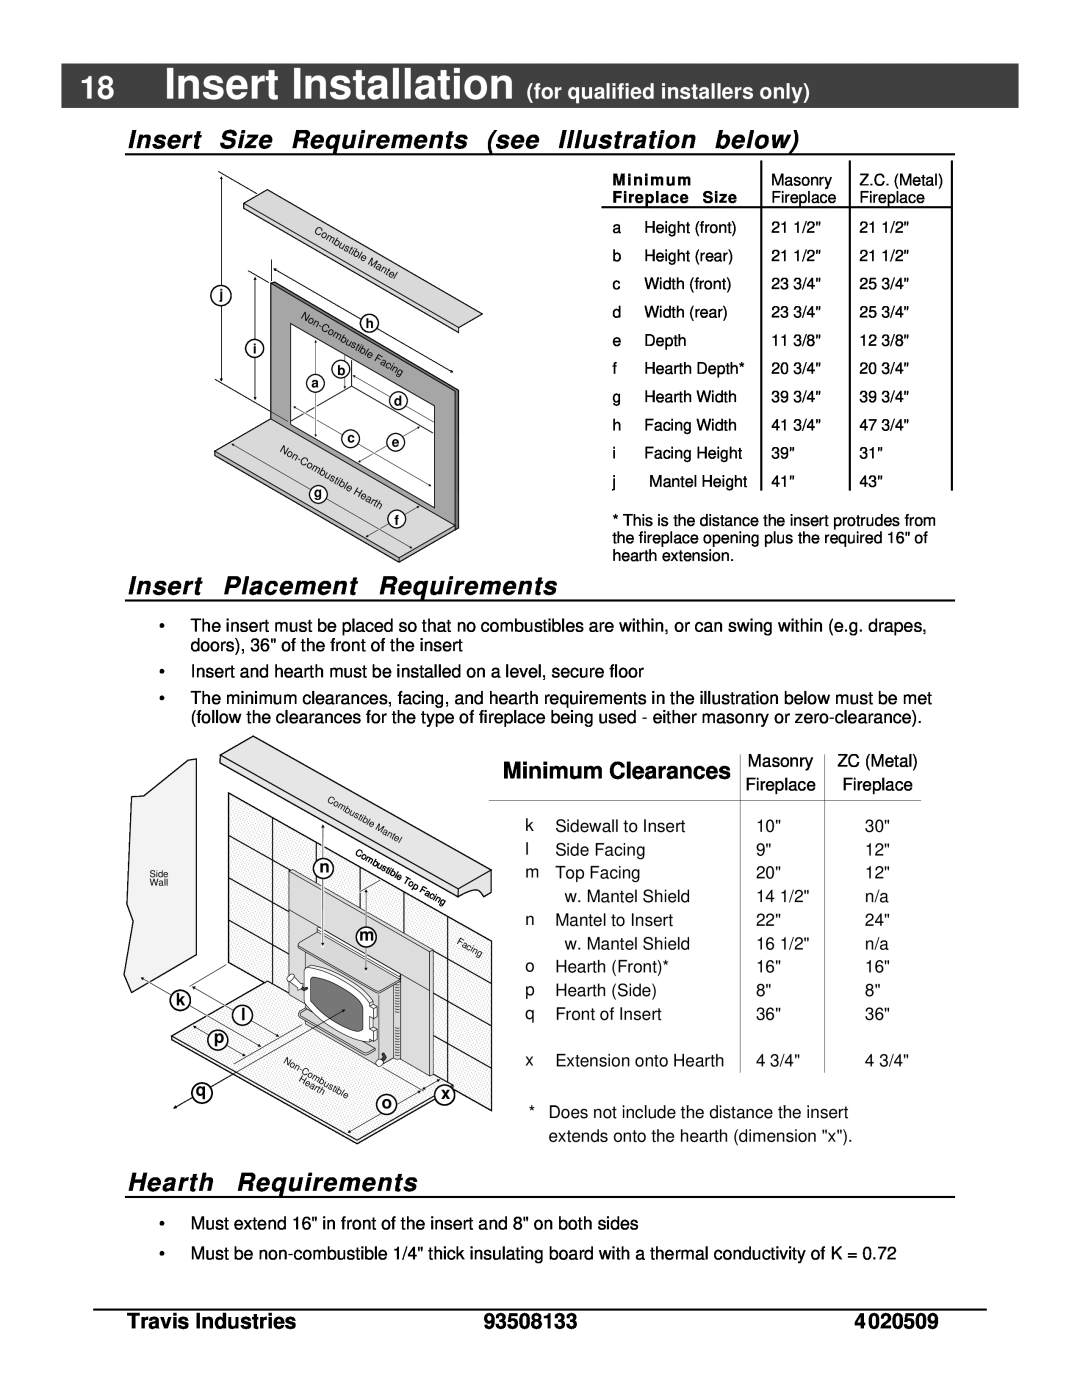 Avalon Stoves 790, 745 Insert Size Requirements see Illustration below, Insert Placement Requirements, Hearth Requirements 